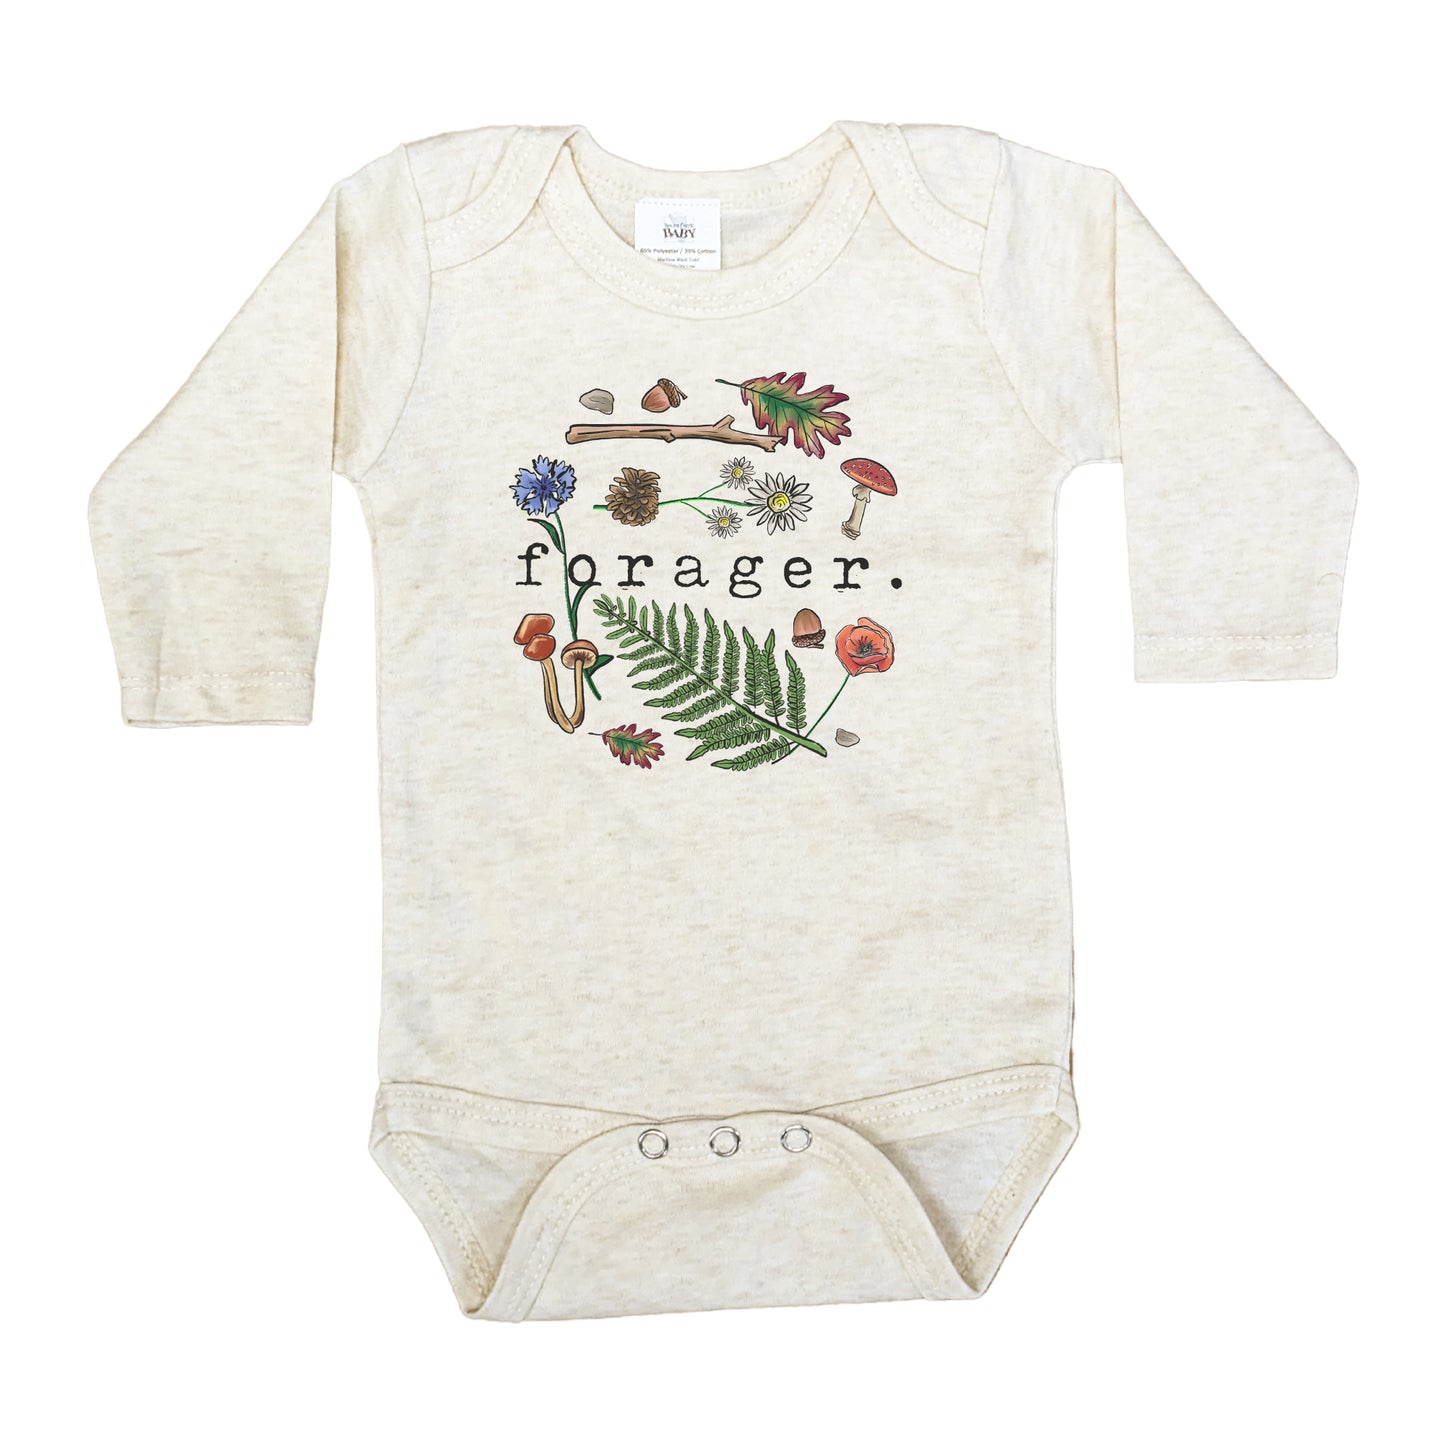 "Forager" Nature Baby Hiking Body Suit